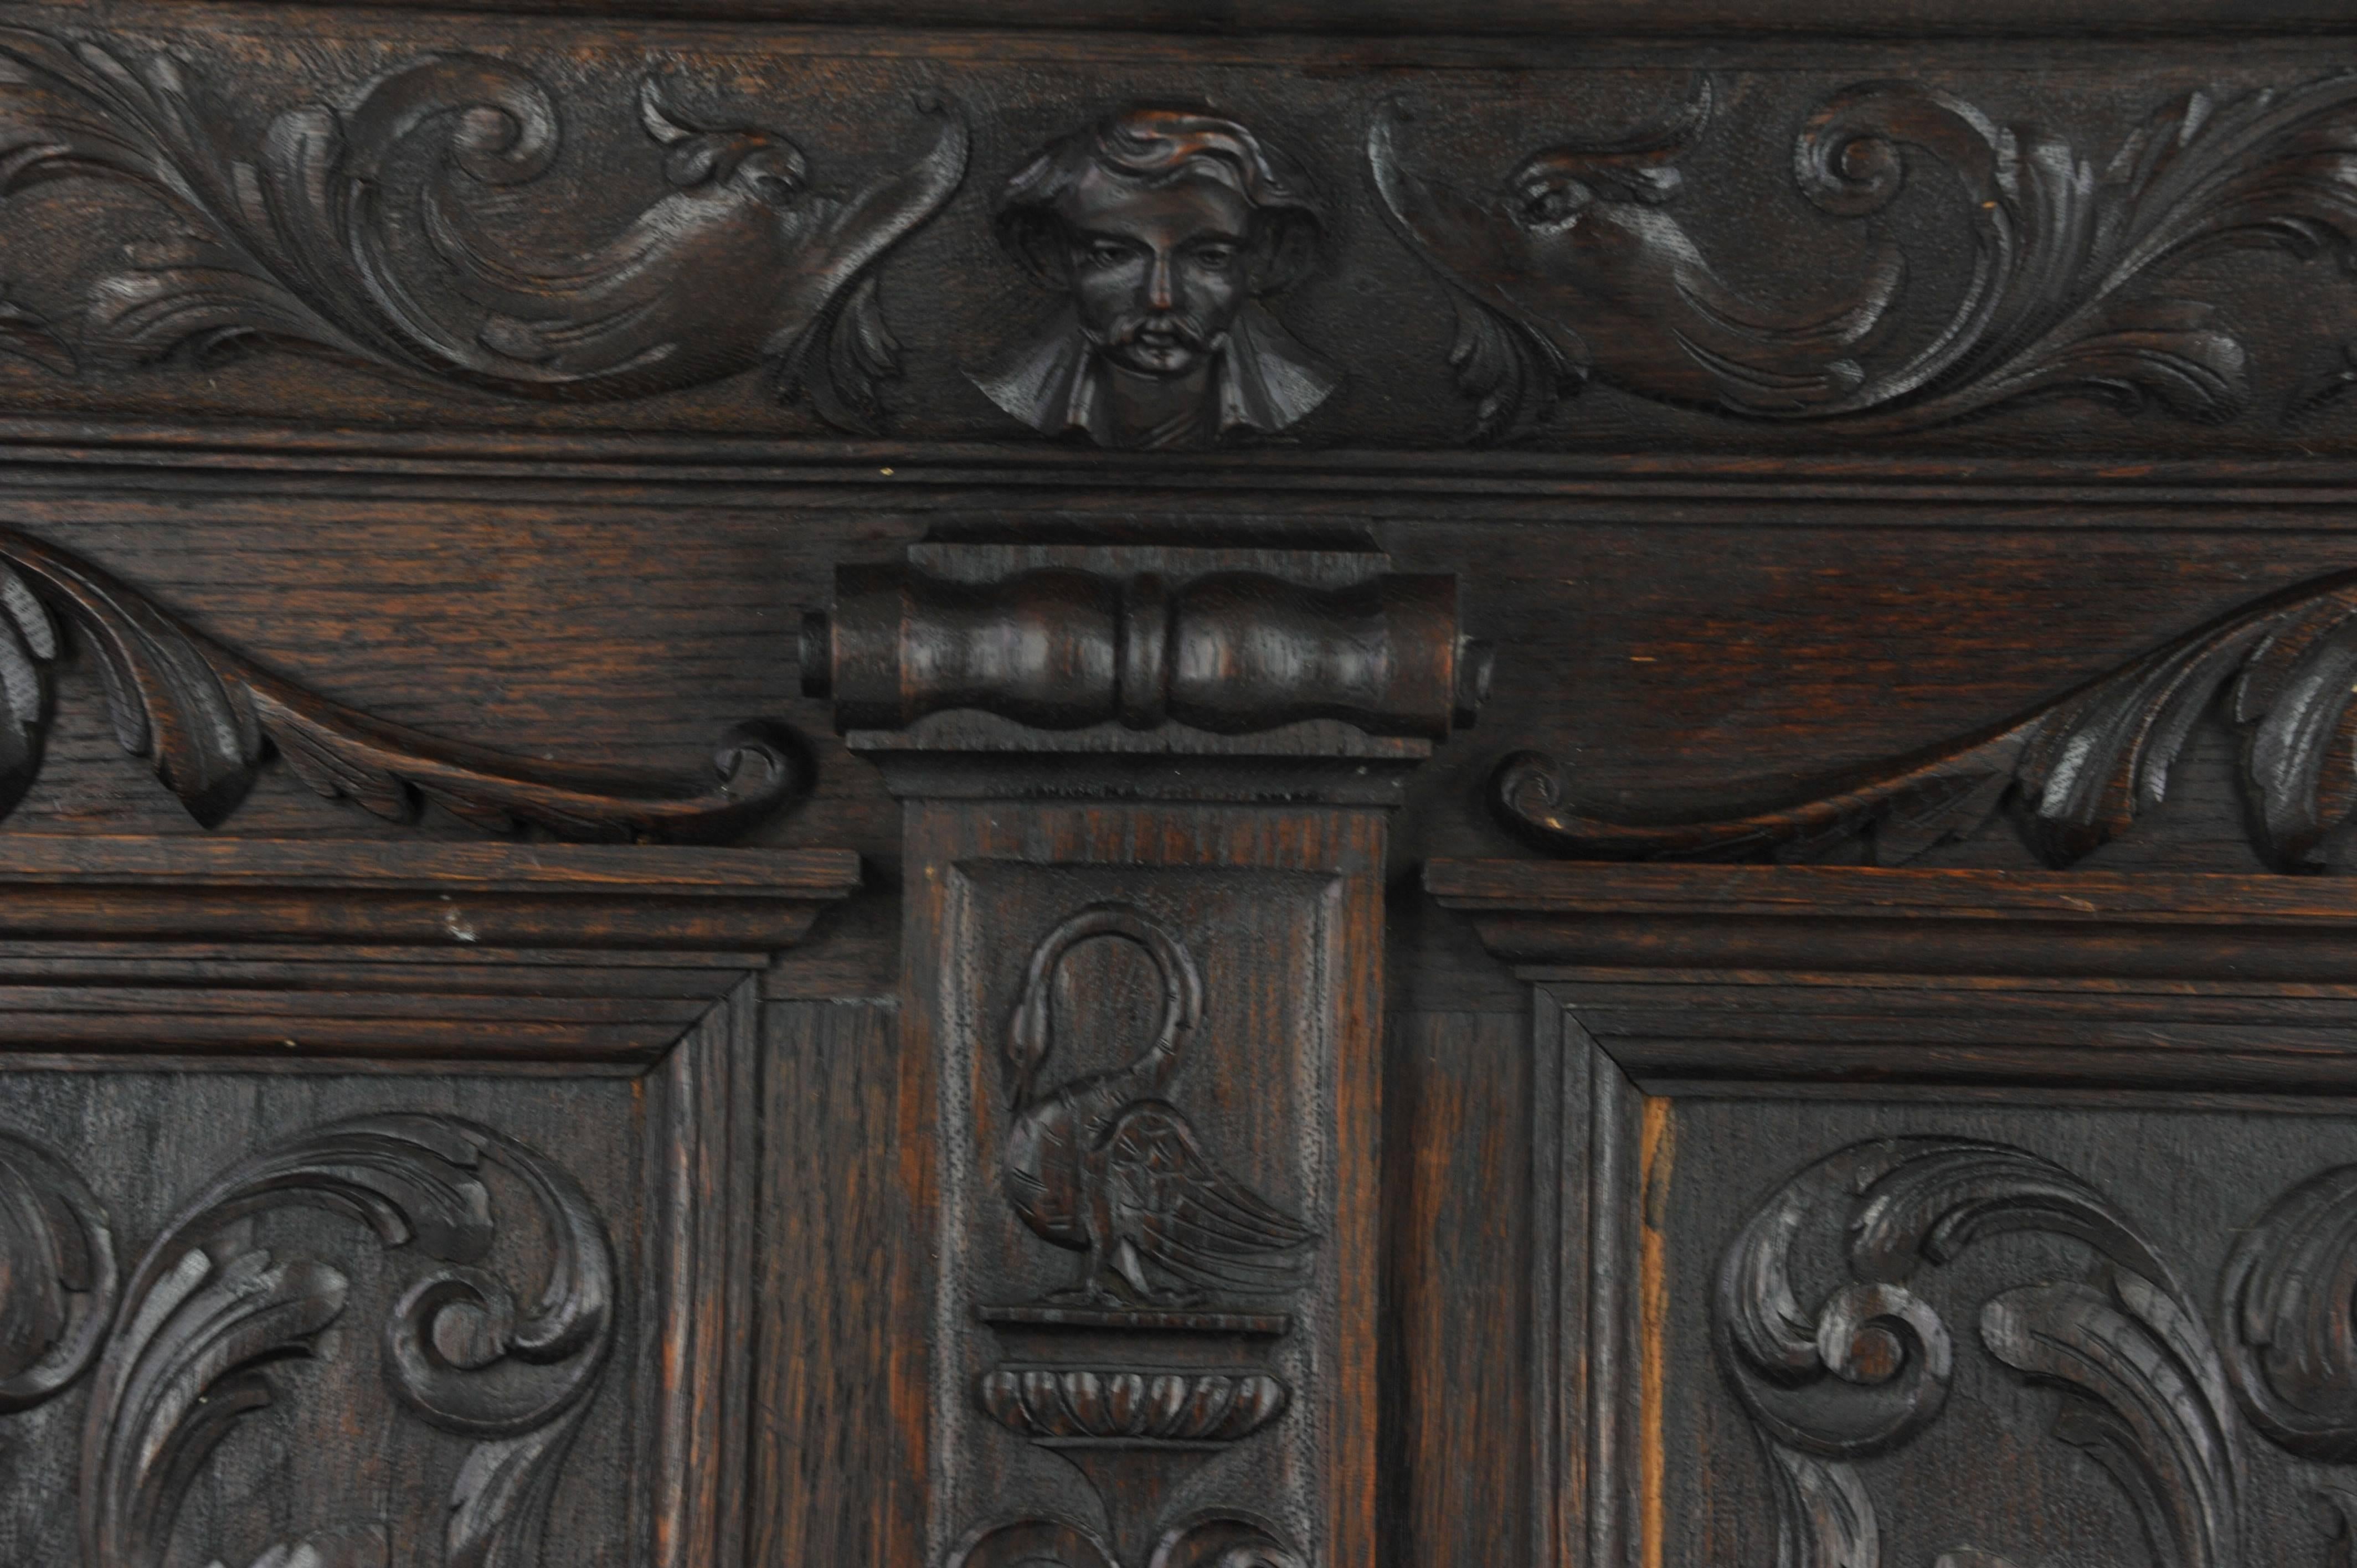 Antique hall bench, carved oak settle, lift up seat, A. Gardner of Glasgow, B1004

Scotland, 1870
Solid oak construction
Original dark oak finish
Back profusely carved with scroll swags
Crowellian style mask
Swan and putti and lions heads
Base has